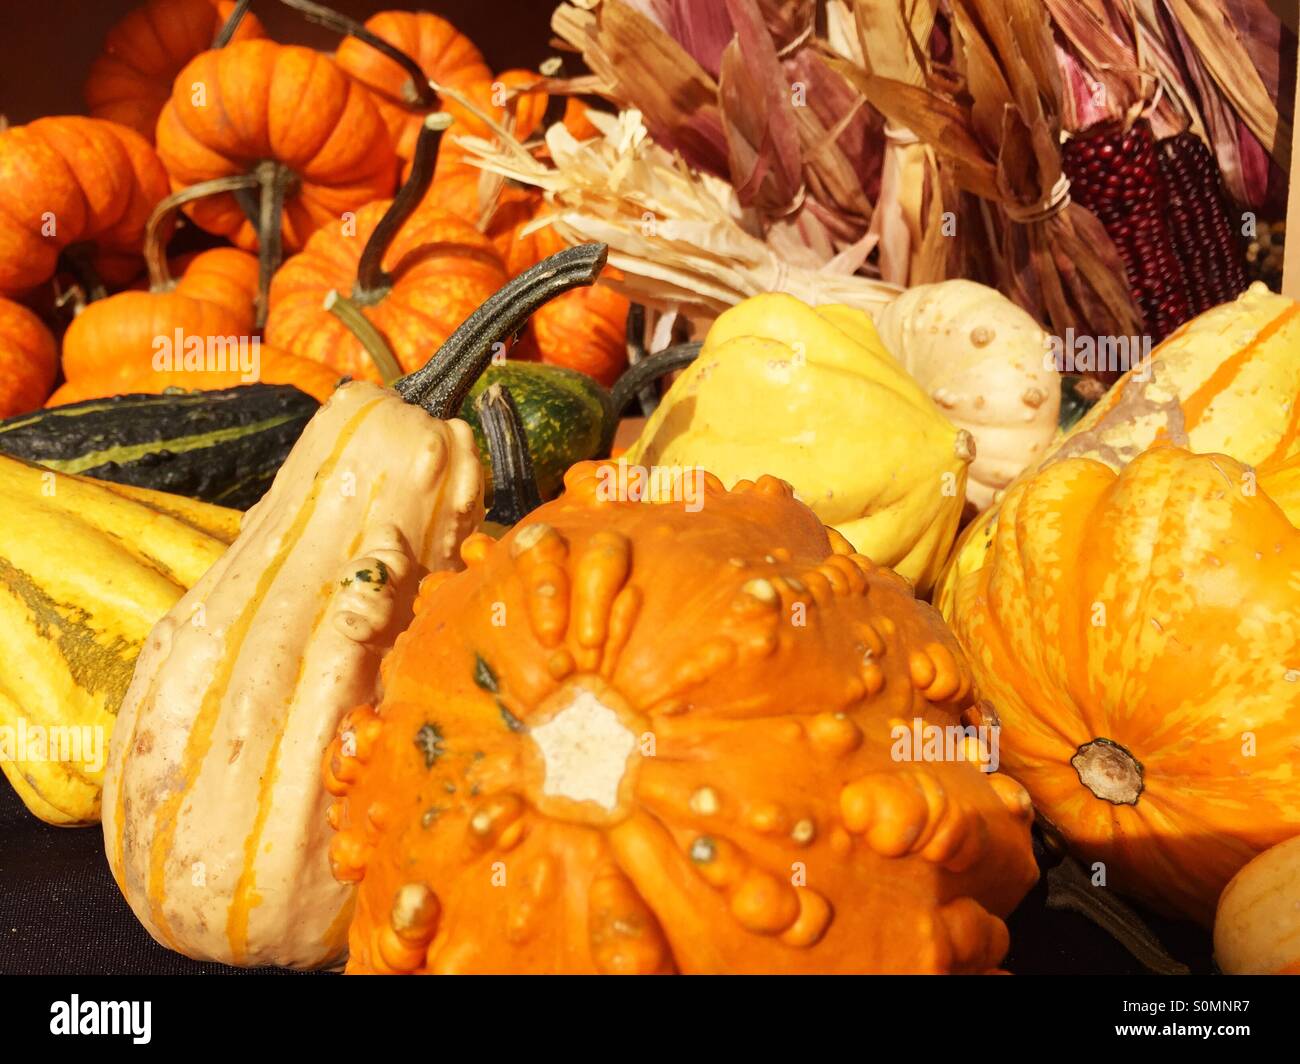 Fall harvest pumpkins and squashes vibrant in the autumn sunshine Stock Photo